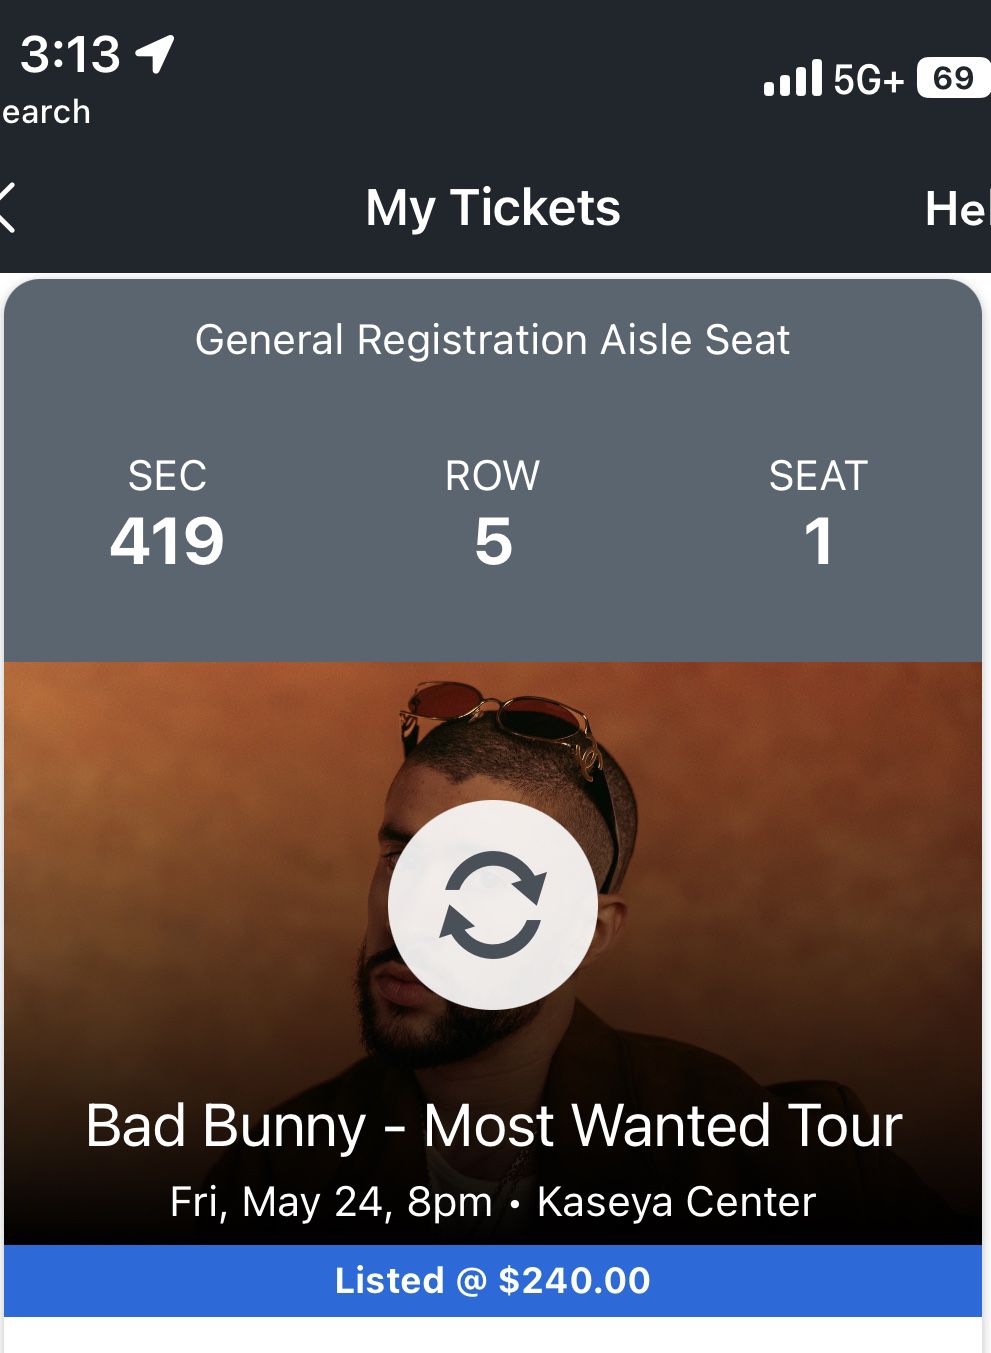 Bad Bunny Most Wanted Tour Miami May 24